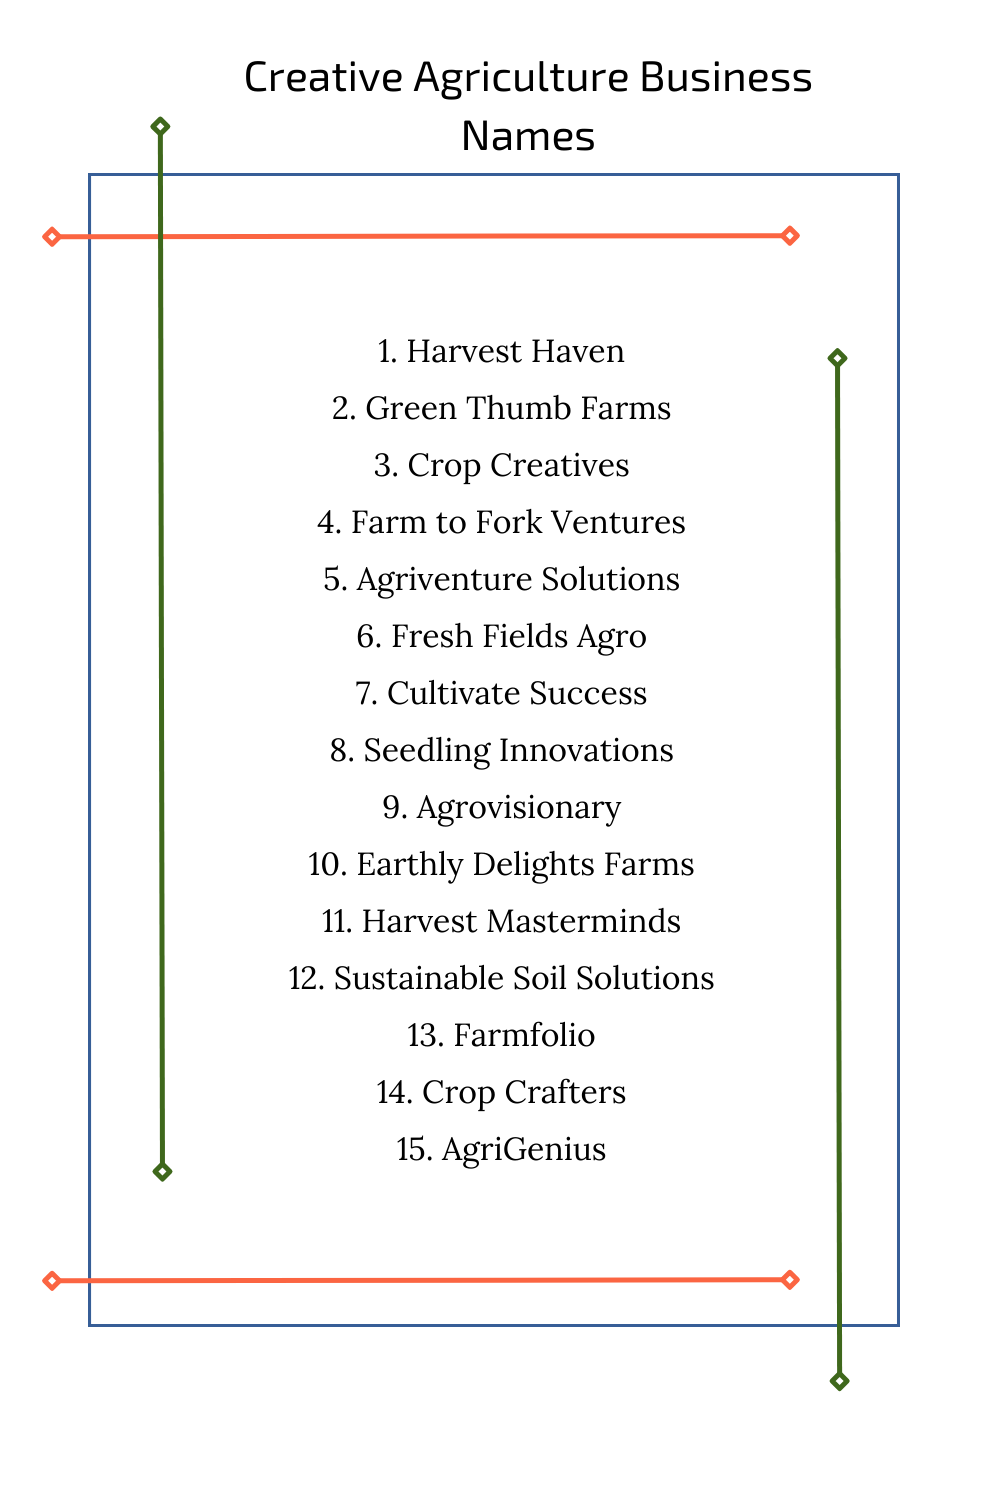 Creative Agriculture Business Names